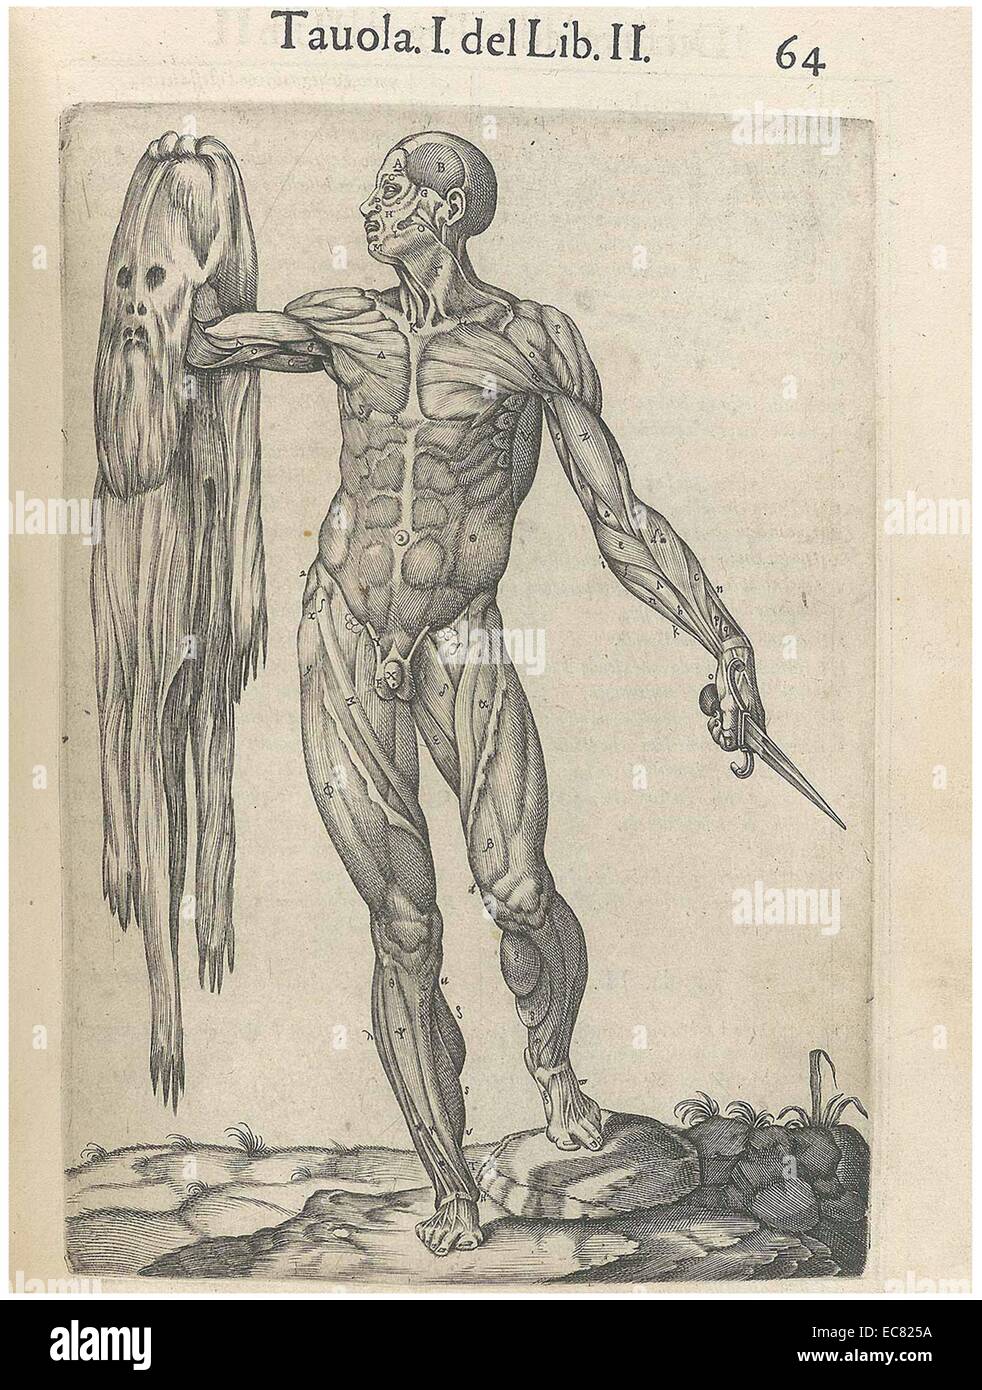 Print from "History of the composition of the human body". By Juan Valverde de Amusco, student of medicine in Padua and Rome under Realdo Colombo and Bartolomeo Eustachi. He published several works on anatomy. Dated 1560 Stock Photo